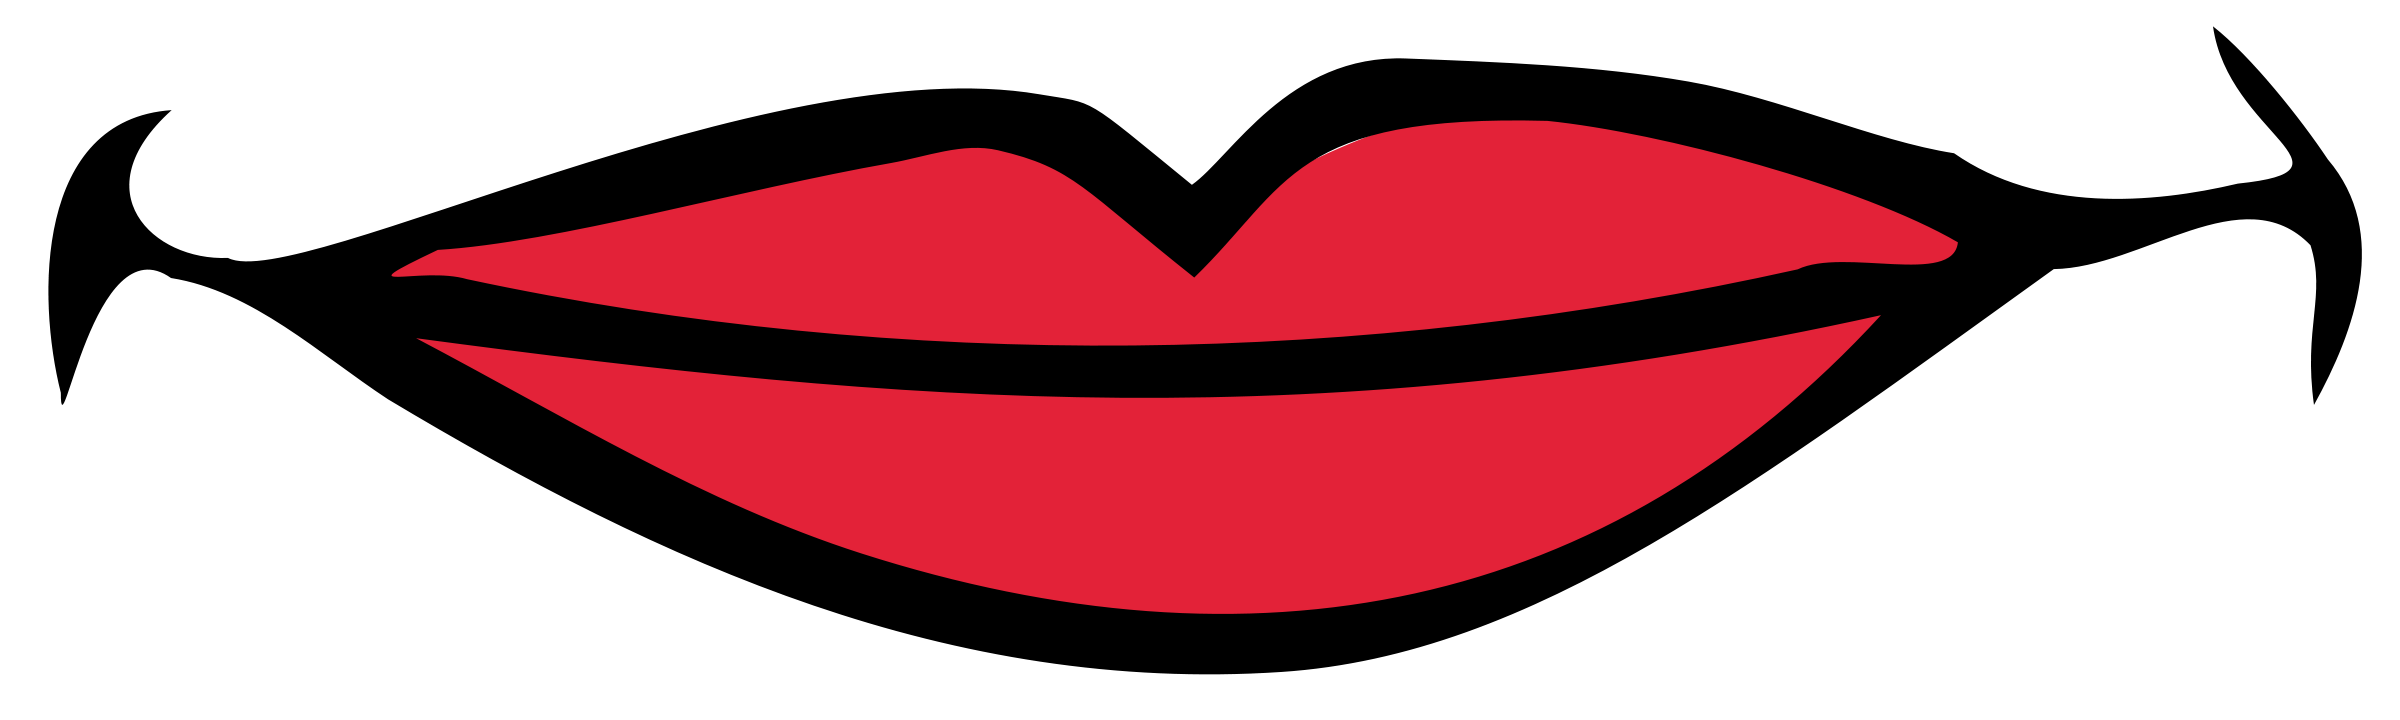 Smile Lips Of Hd Photos Clipart